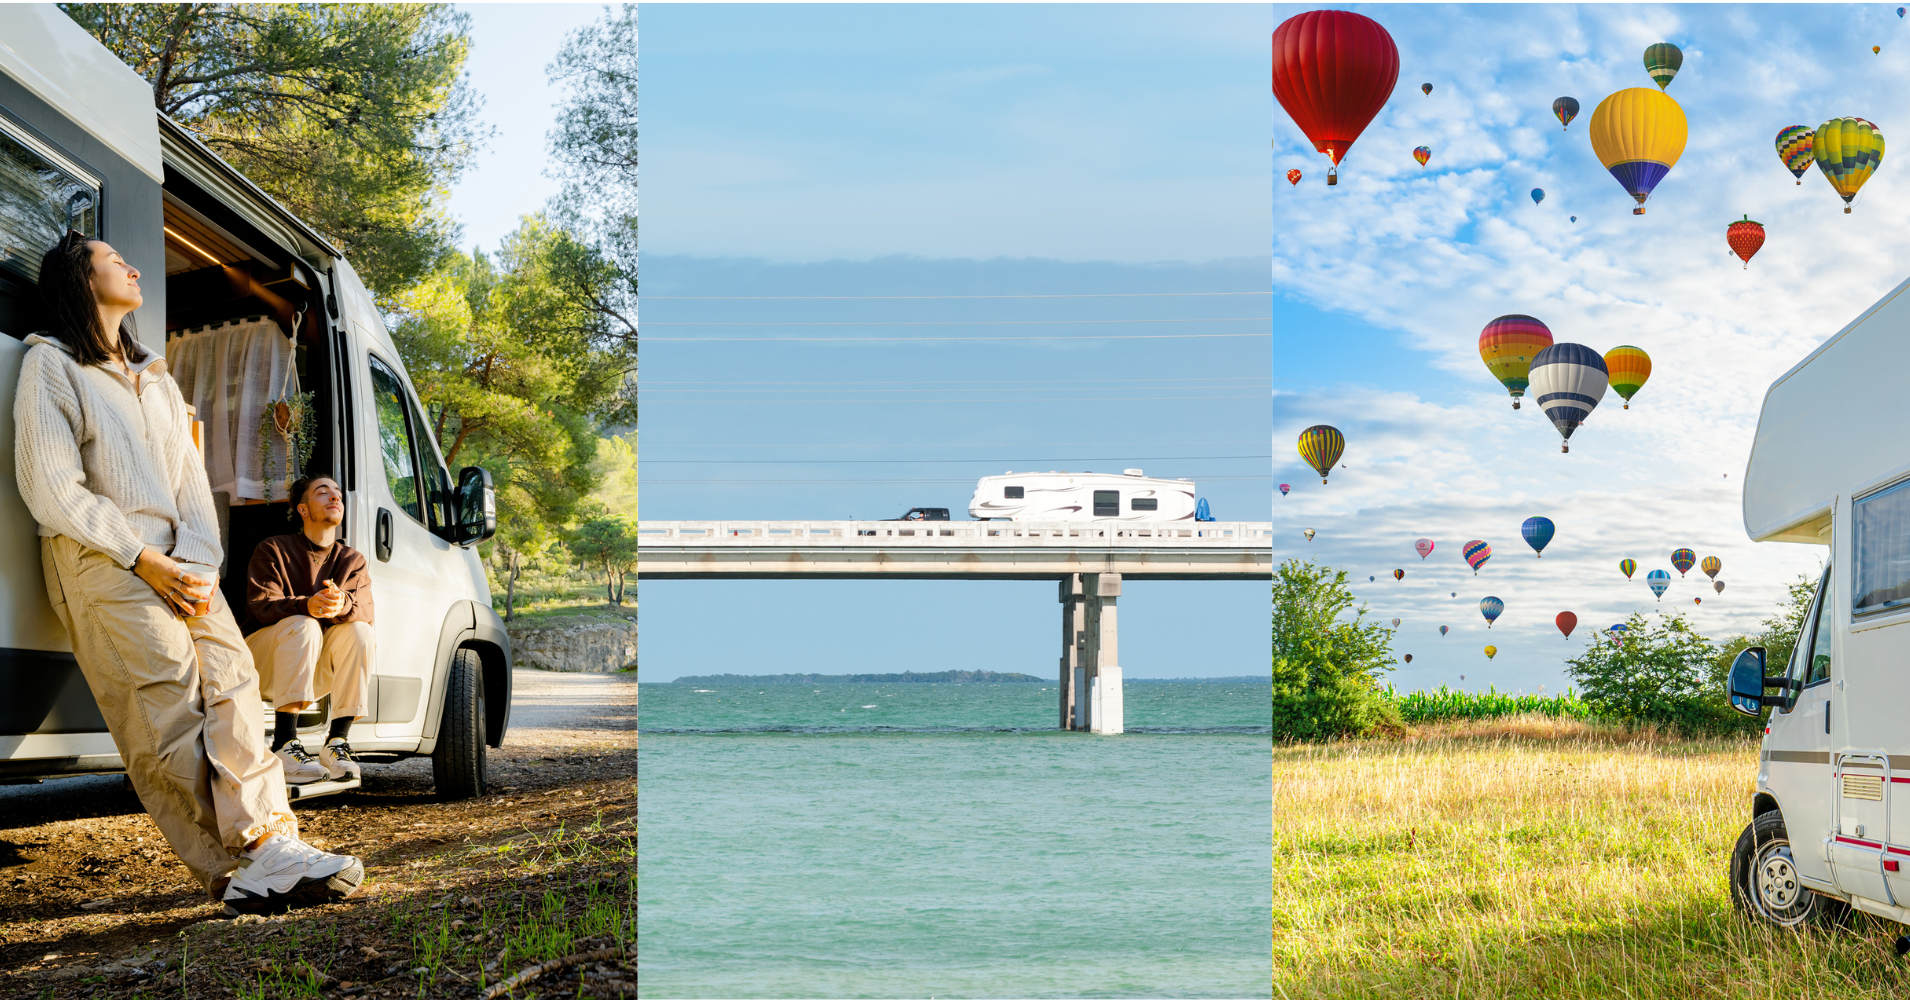 <p>Ah, the great American road trip. A tried-and-true way to experience everything from the rolling hills of the Appalachian mountains to the sparkling California coast. And how better to see the country than in a recreational vehicle?</p>  <p>RVs offer many of the comforts of home (or a hotel) as well as the portability of a vehicle. If you’re new to RVing, here are a few easy starter trips to try. Pack up the family and pets and hit the road!</p>